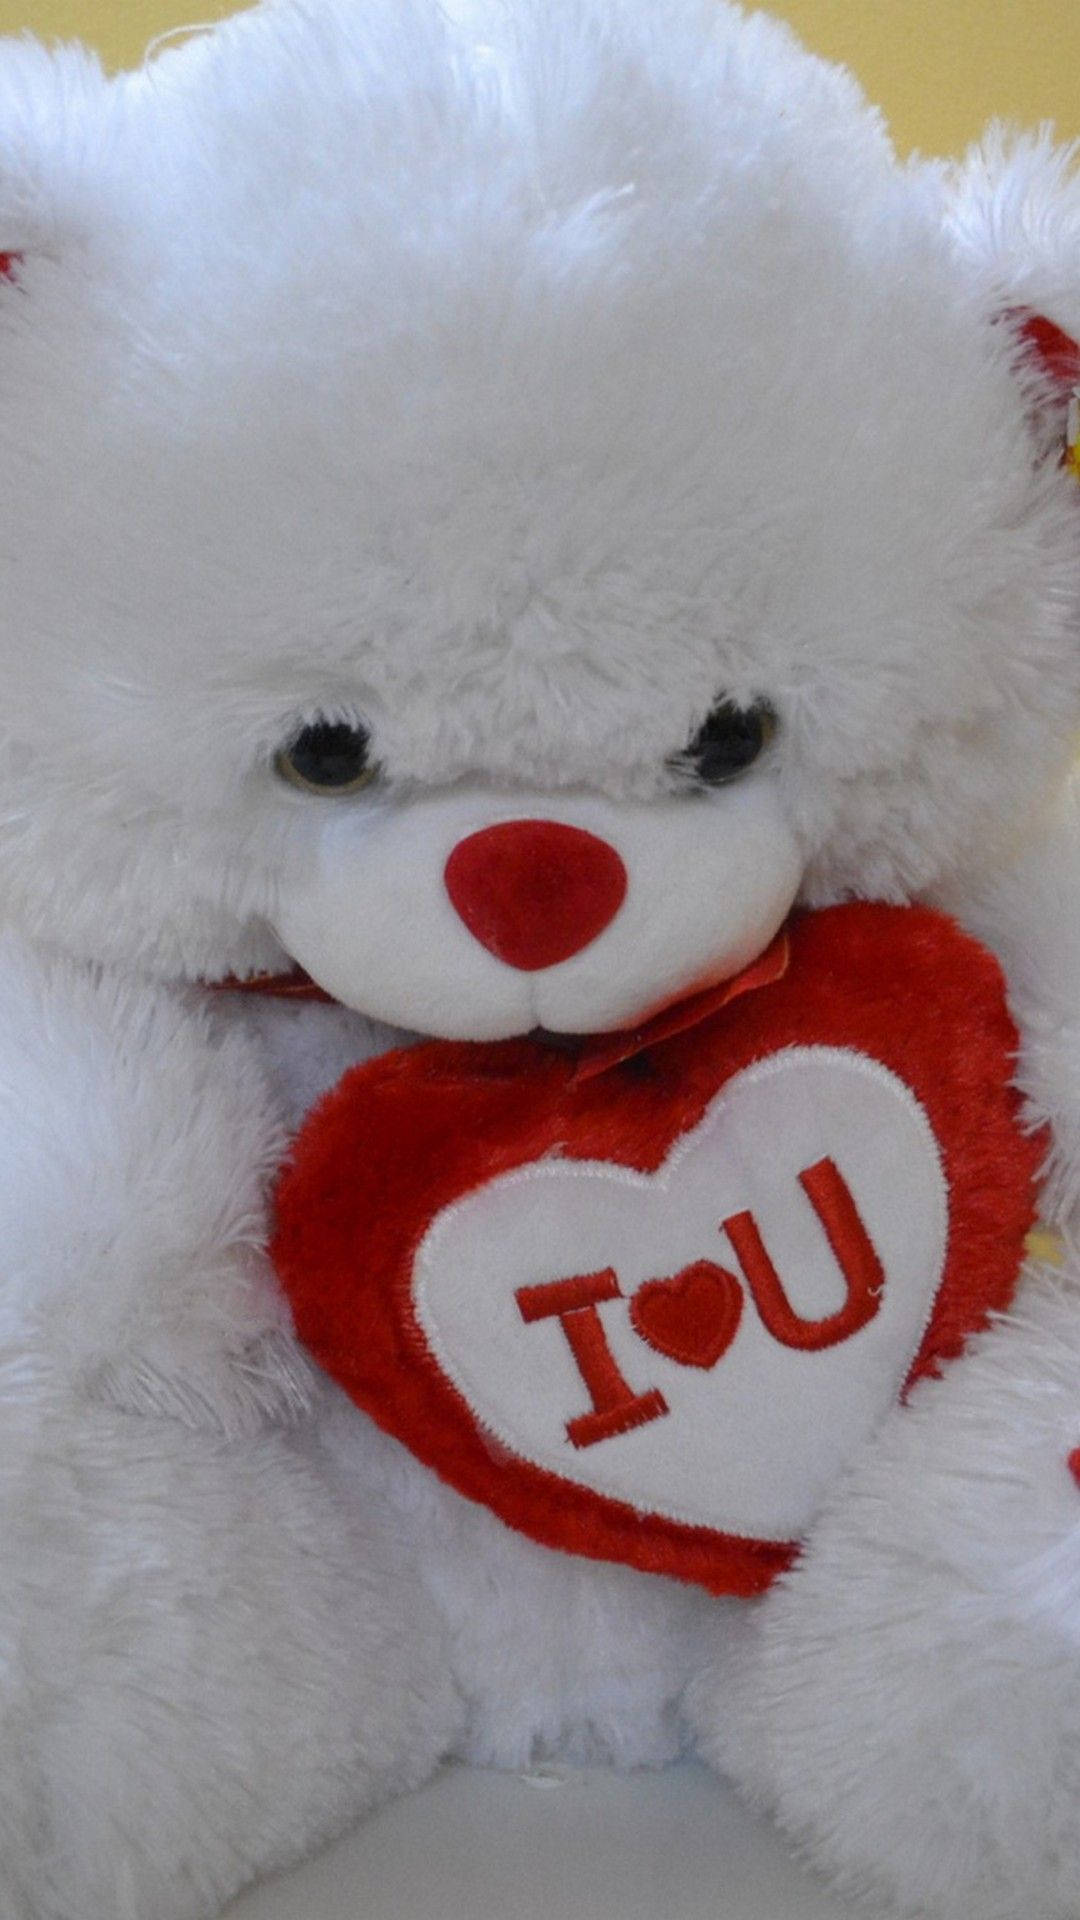 white teddy bear with heart wallpaper